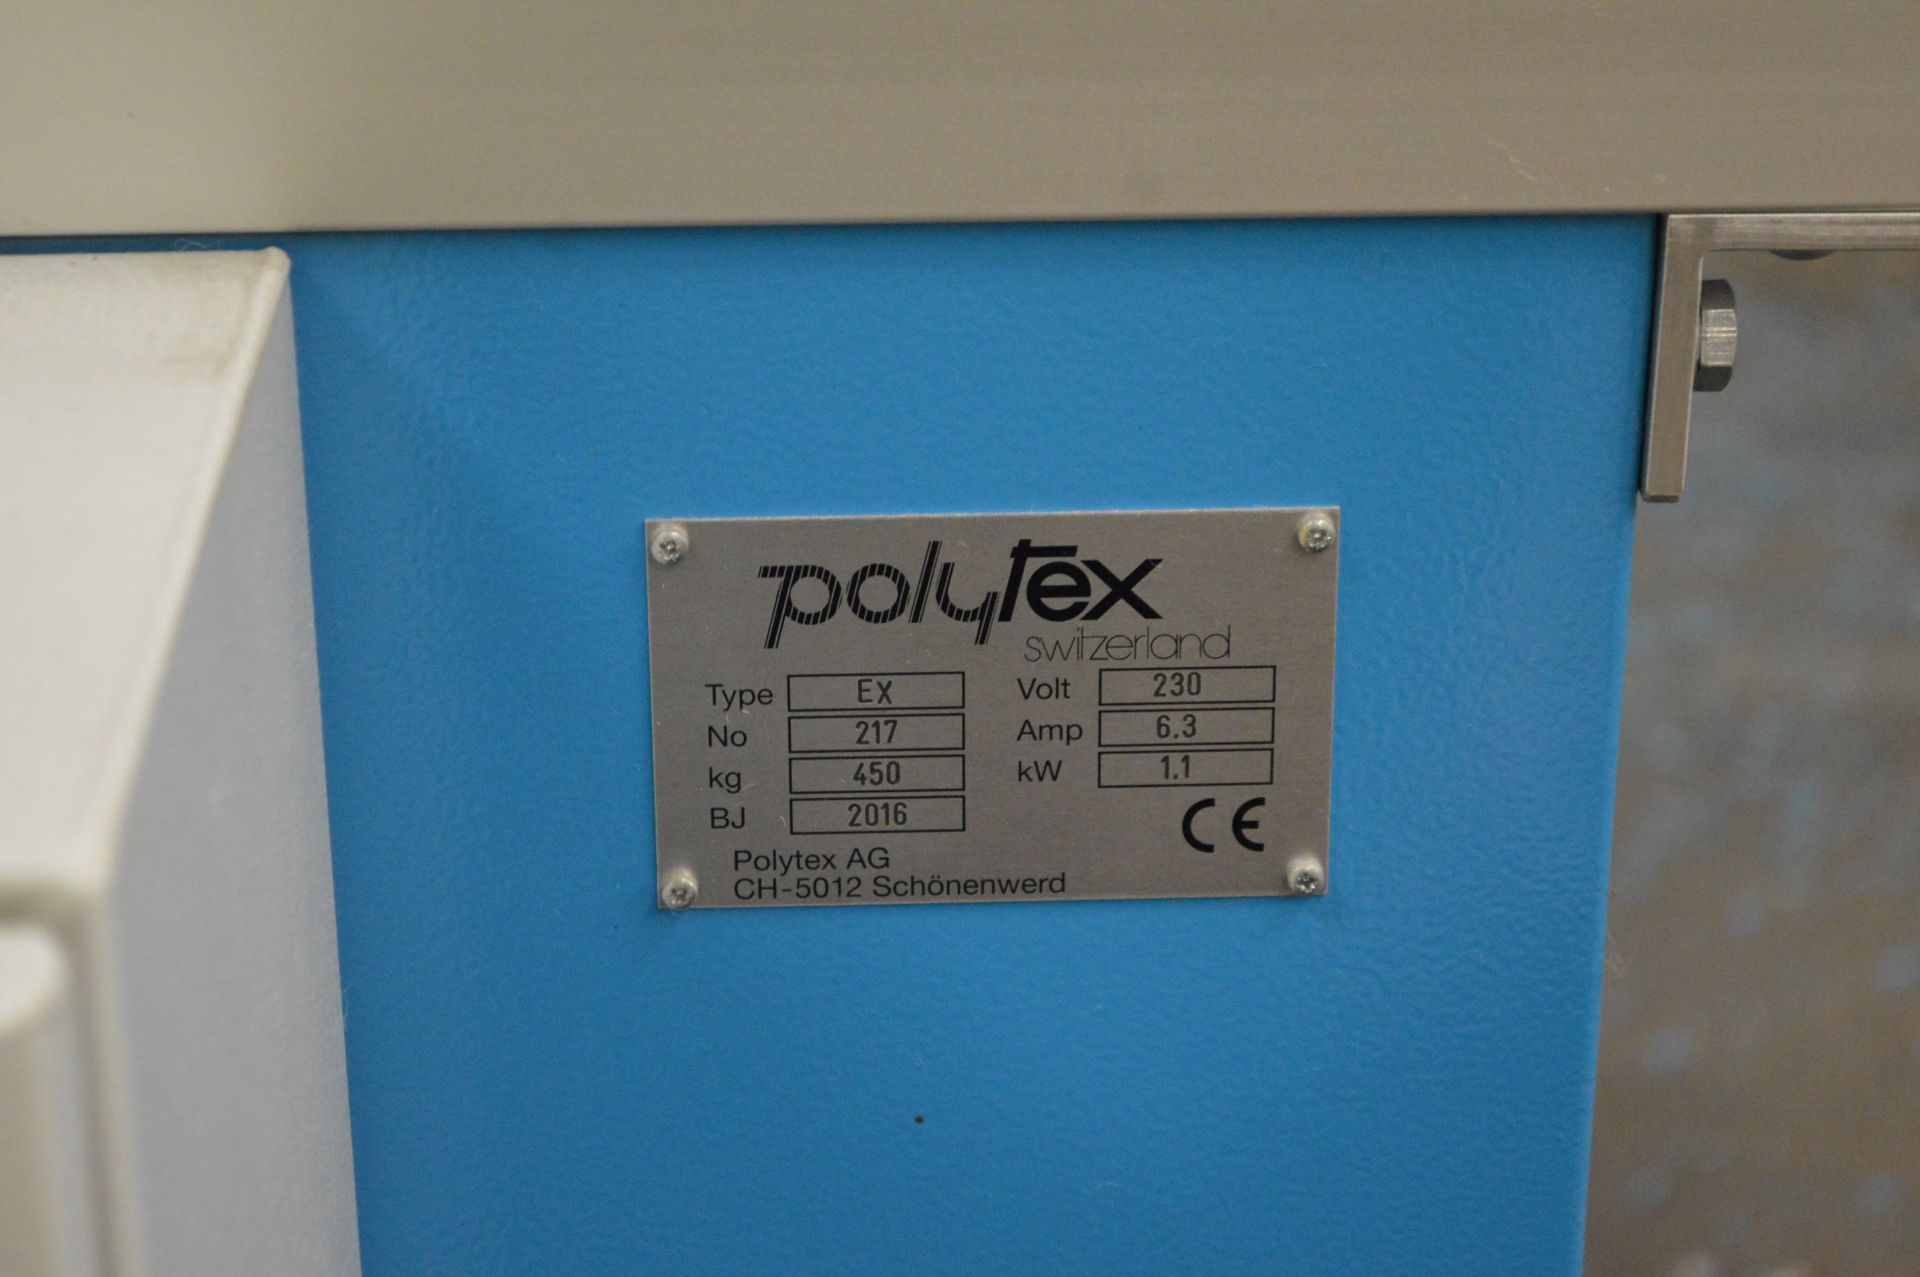 Polytex EX UNIVERSAL MOUNTING MACHINE, serial no. 217, year of manufacture 2016, 230V, 450kg machine - Image 4 of 4